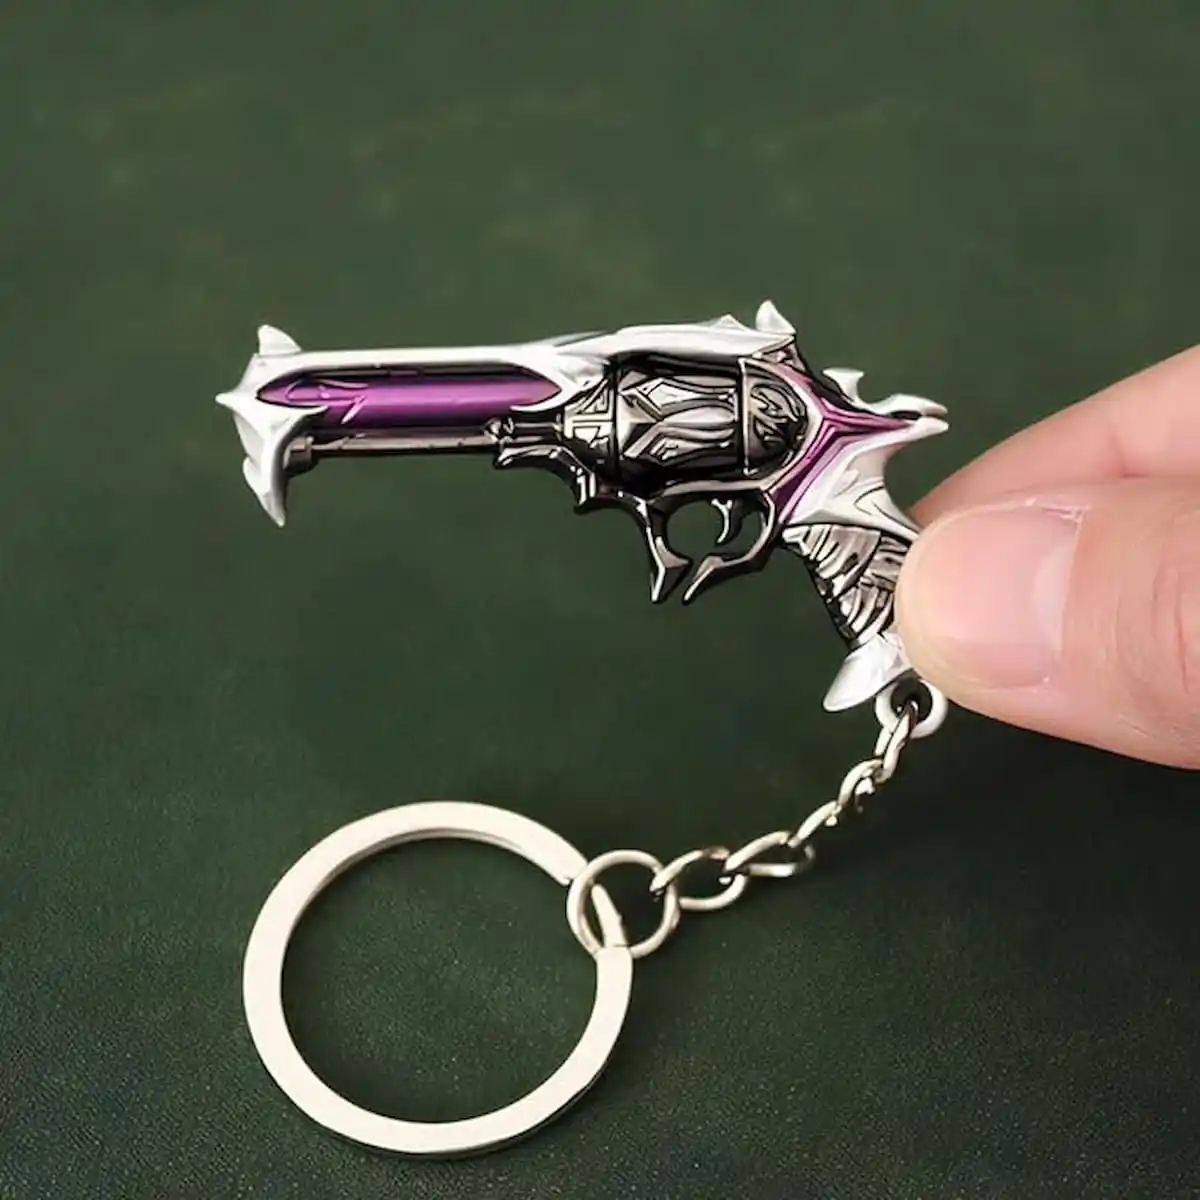 An image of a keyring of the Reaver Sheriff revolver from VALORANT